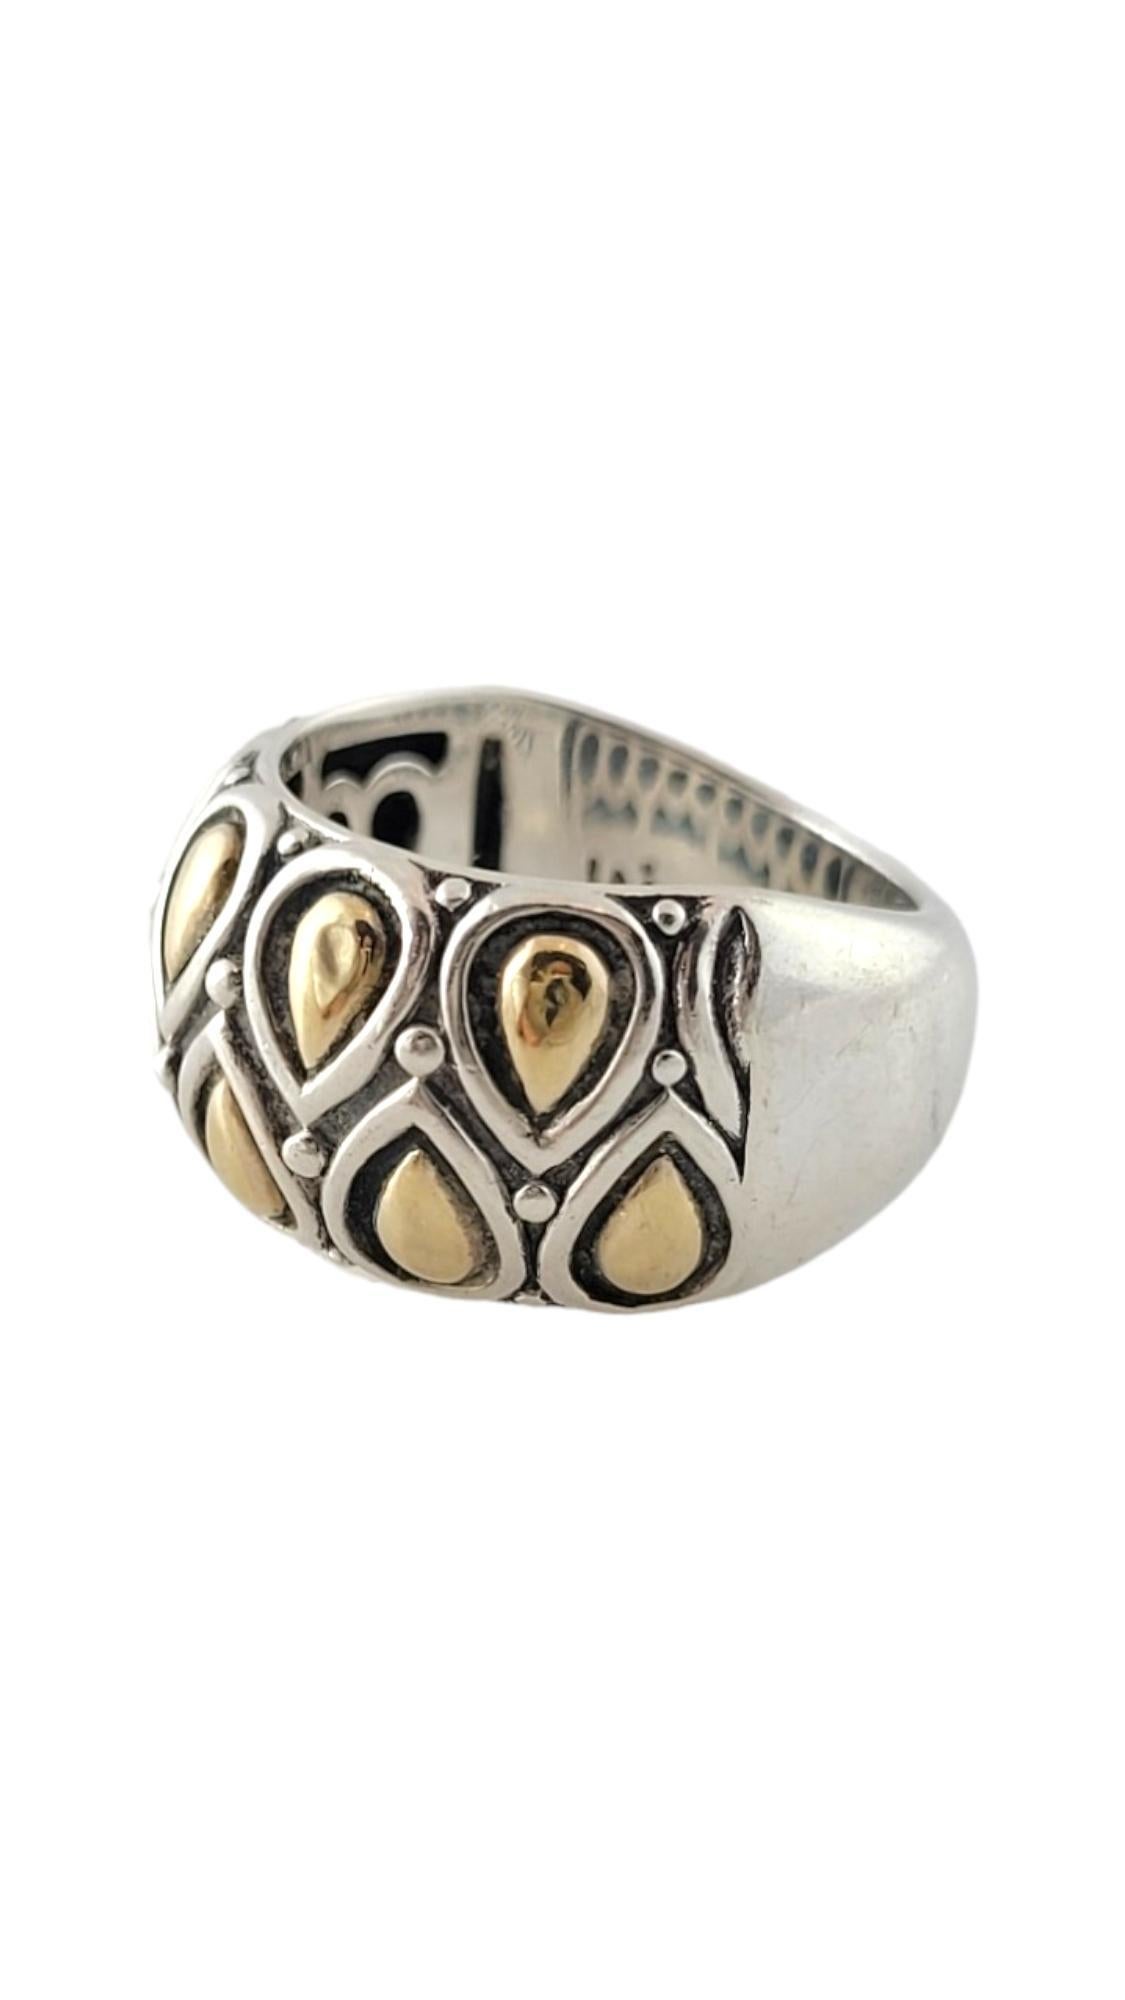 John Hardy JAi 14K Yellow Gold Sterling Silver Lotus Petal Band Ring Size 7

This gorgeous band ring by JAi by John Hardy is crafted from sterling silver with 14K yellow gold lotus petals!

Ring size: 7
Shank: 5.40mm
Front: 11.90mm

Weight: 6.72